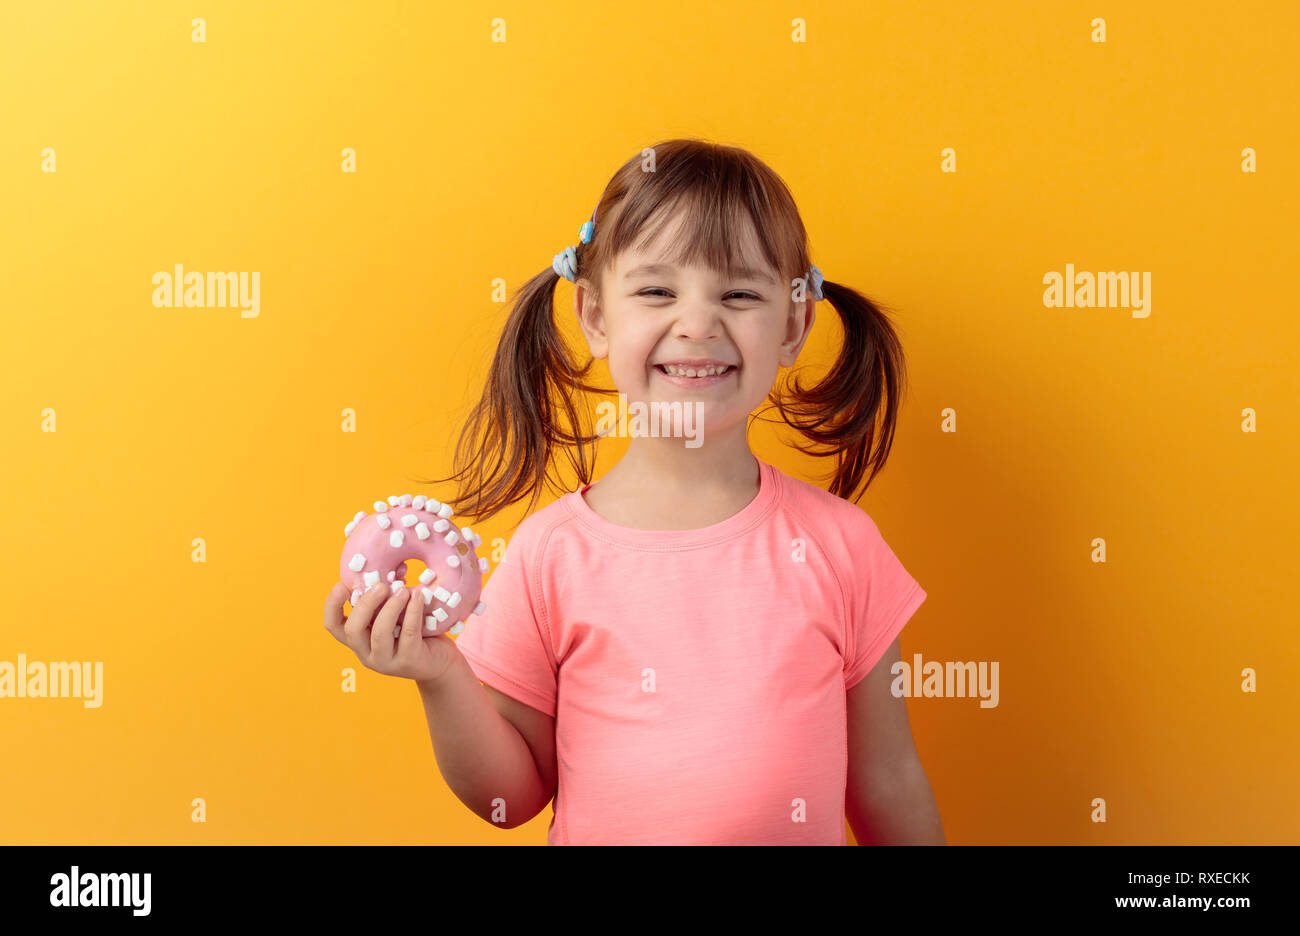 Four-year-old girl in a pink t-shirt eat donut. The girl's hair is tied in tails. Orange background. Stock Photo